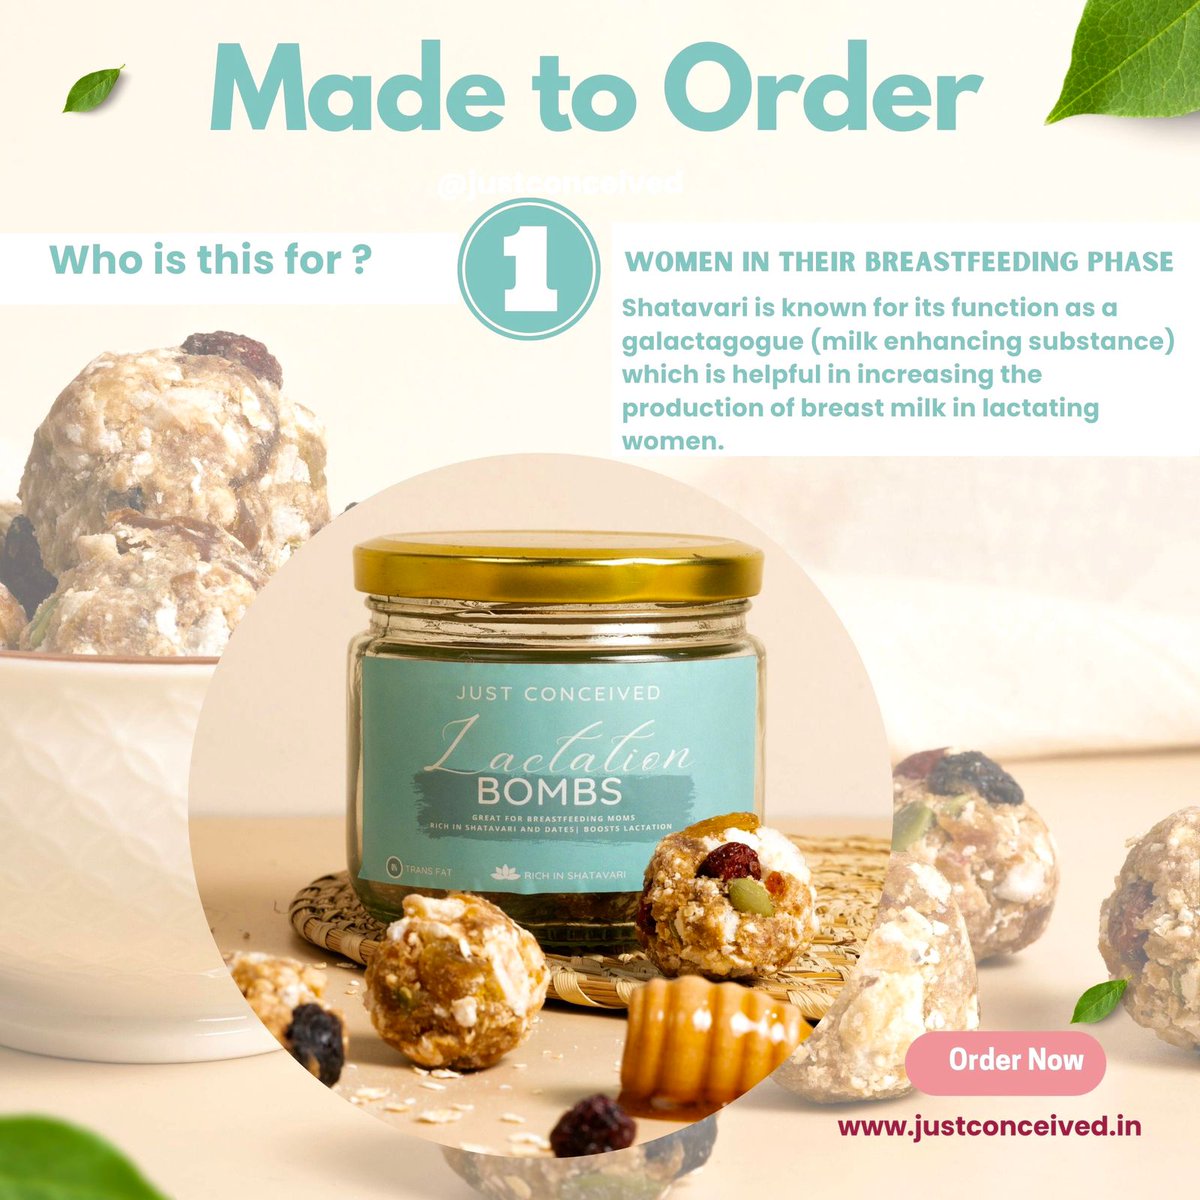 🤱 Introducing Lactation Bombs: The Shatavari Powerhouse 🌱

Order now on our website 💫 justconceived.in

#justconceived #LactationSupport #ShatavariMagic #PregnancyWellness #HealthyMoms #BreastfeedingJourney #wholesomenutrition